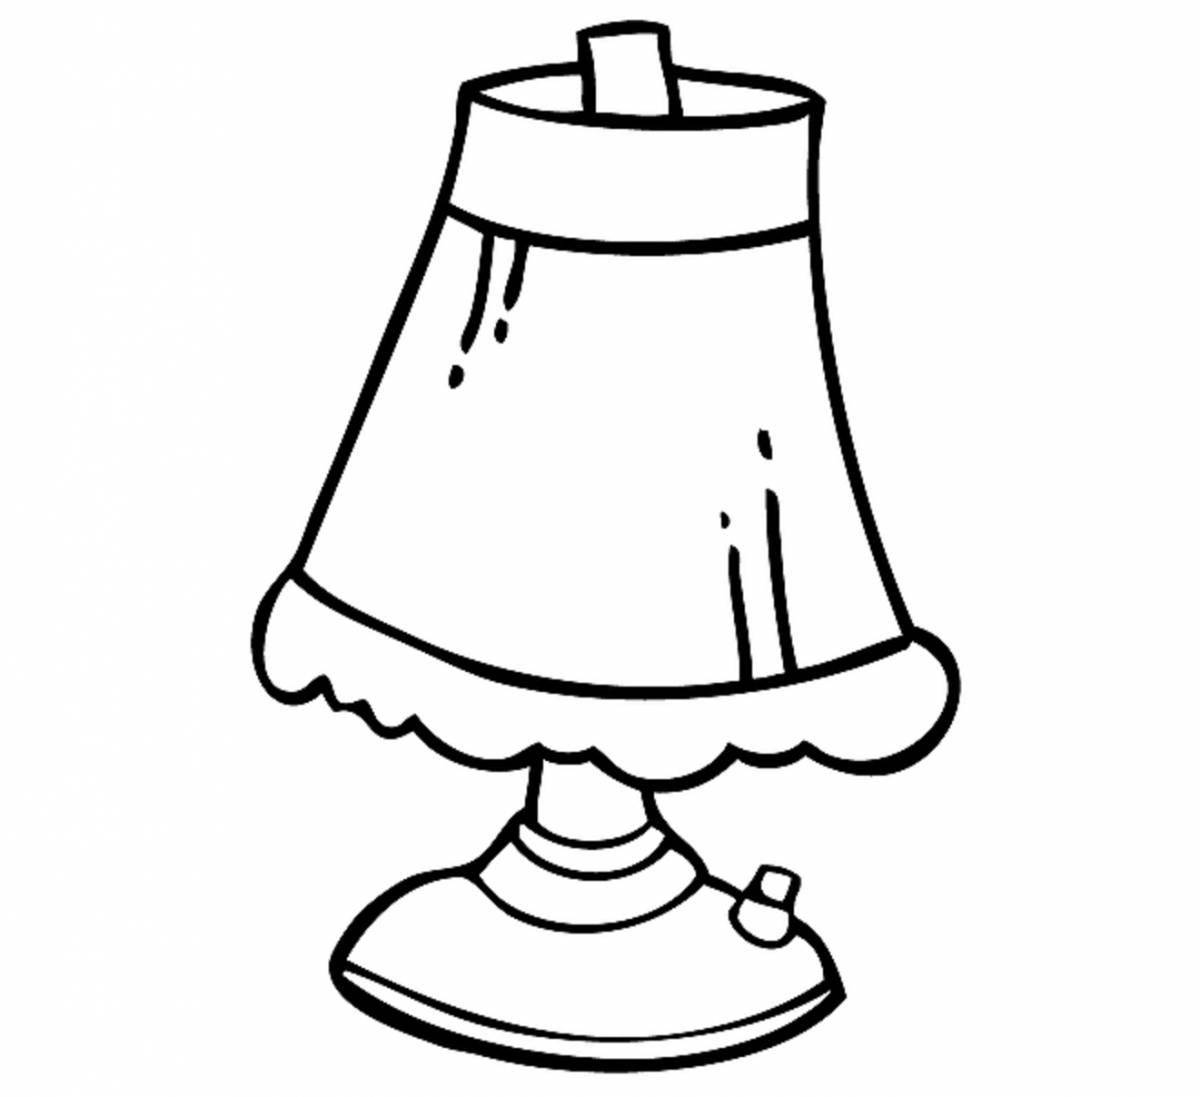 Majestic night light coloring page